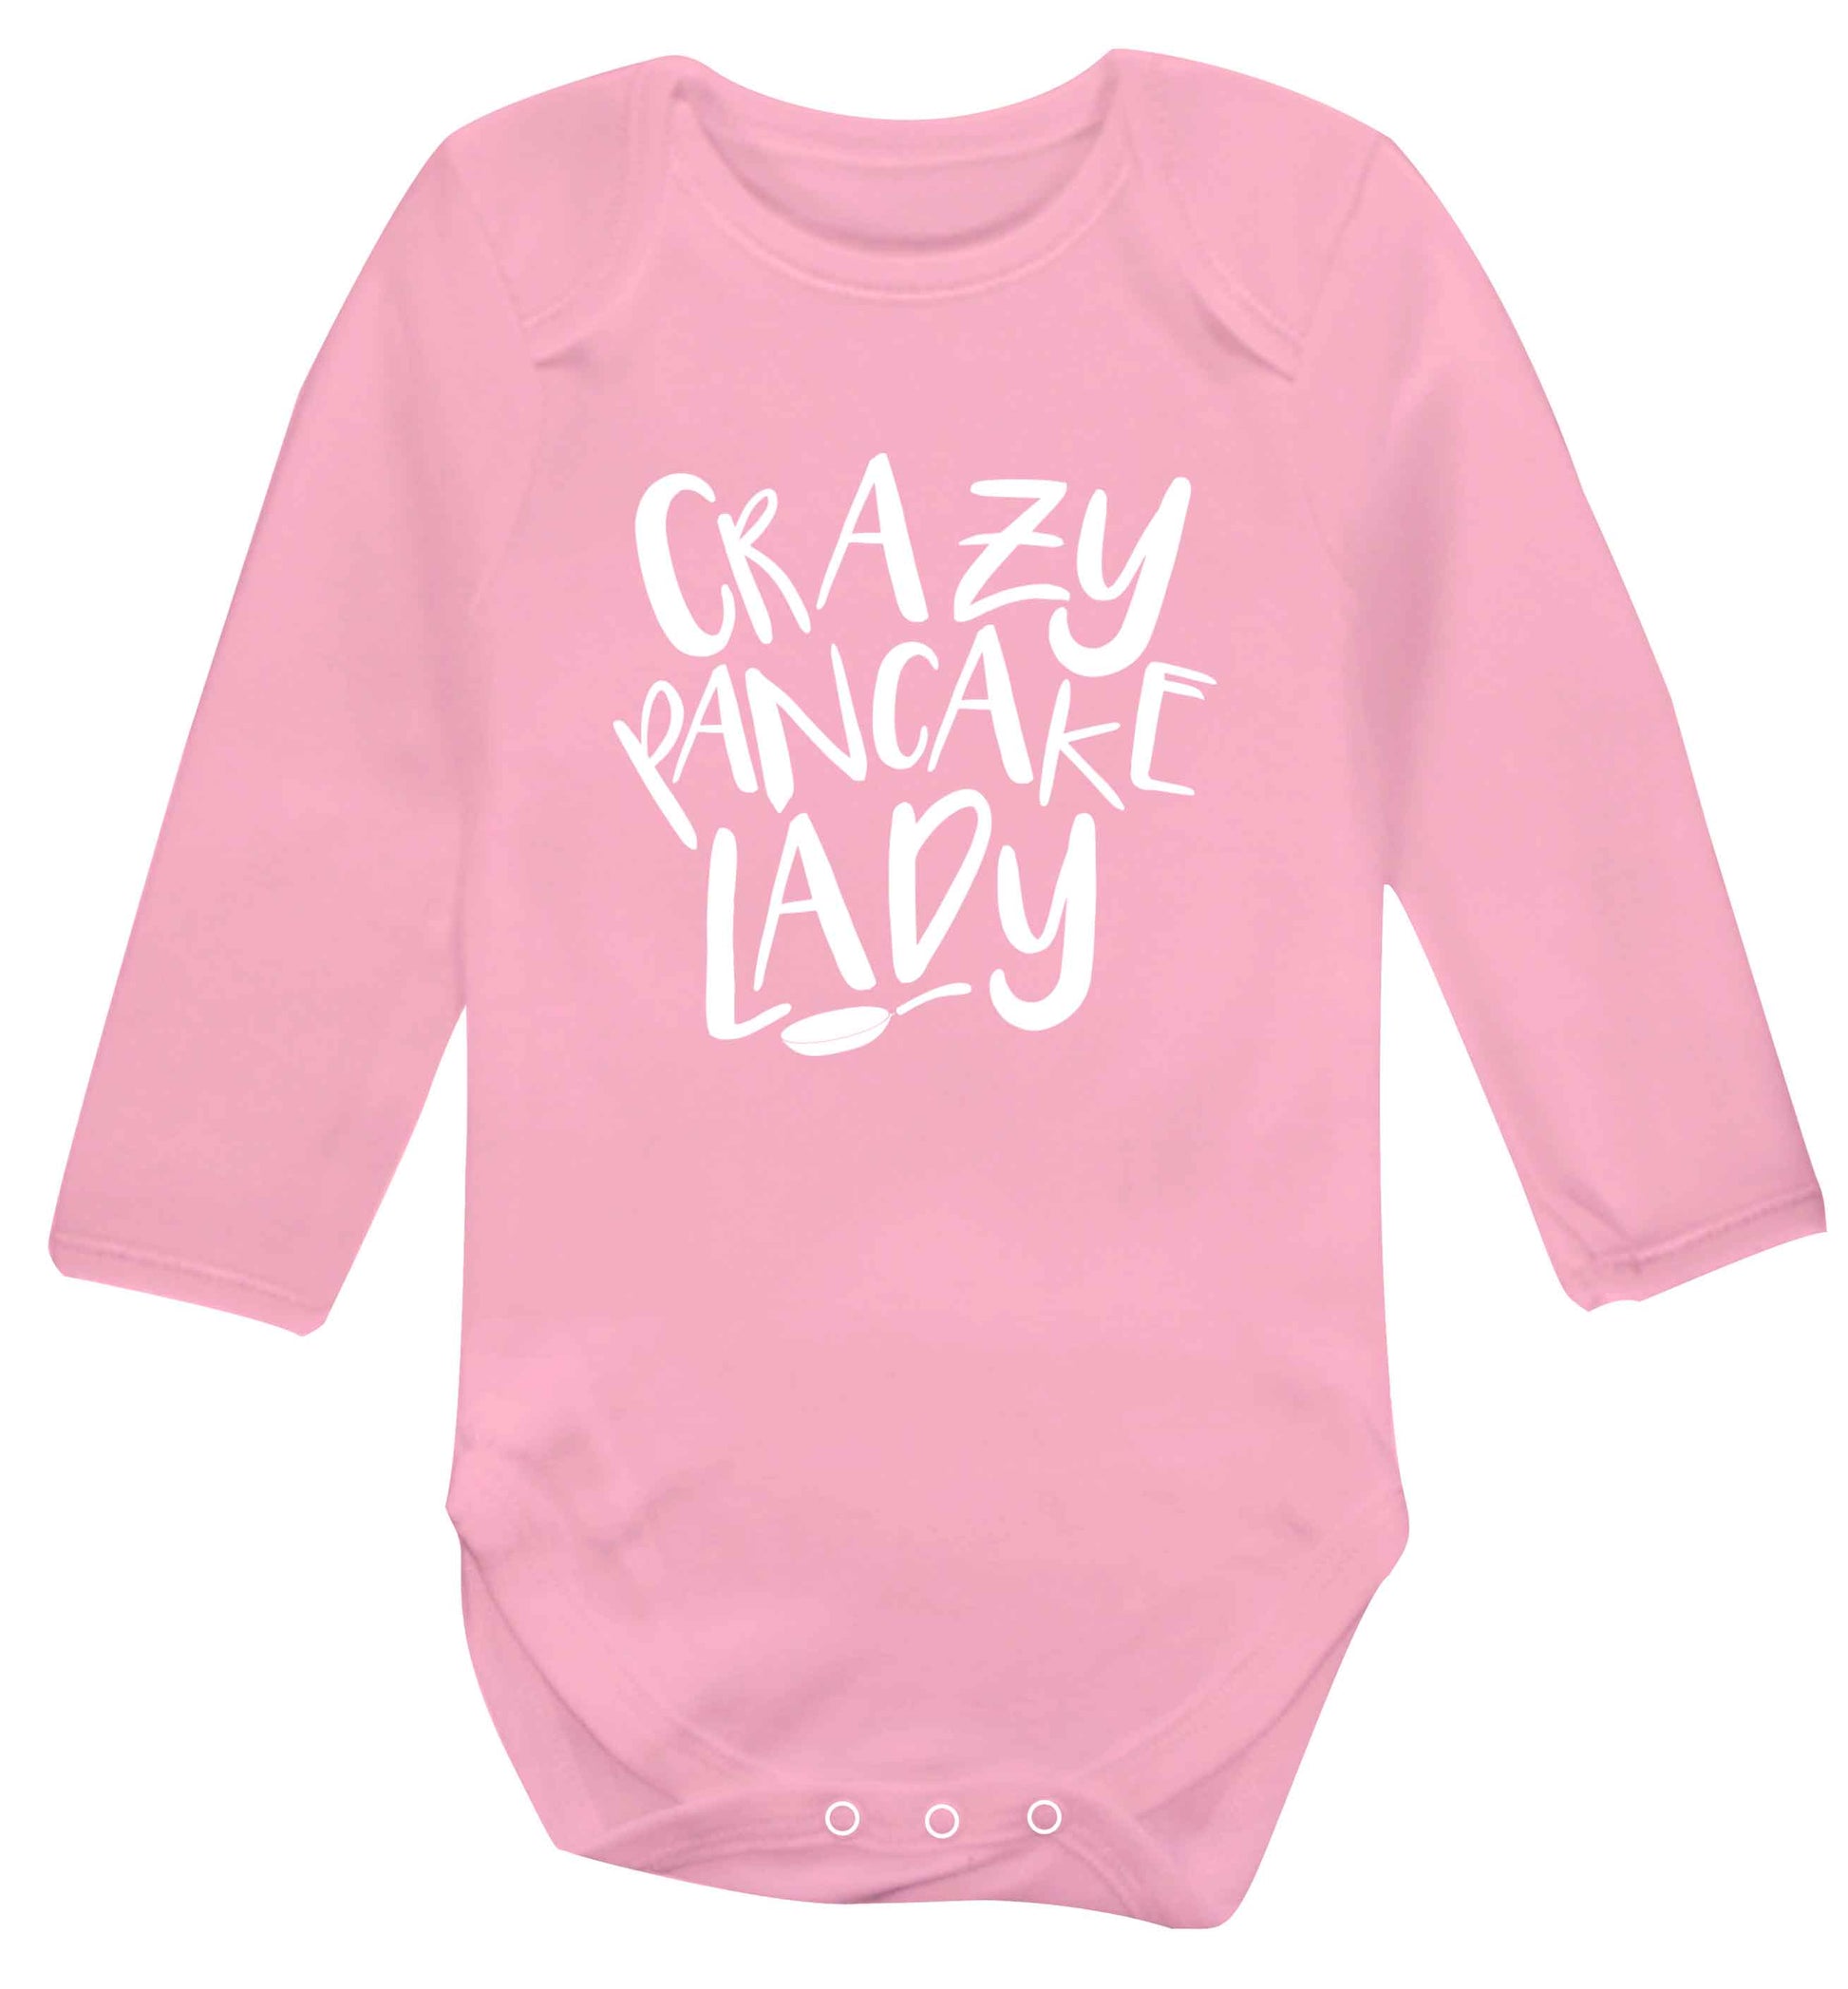 Crazy pancake lady baby vest long sleeved pale pink 6-12 months